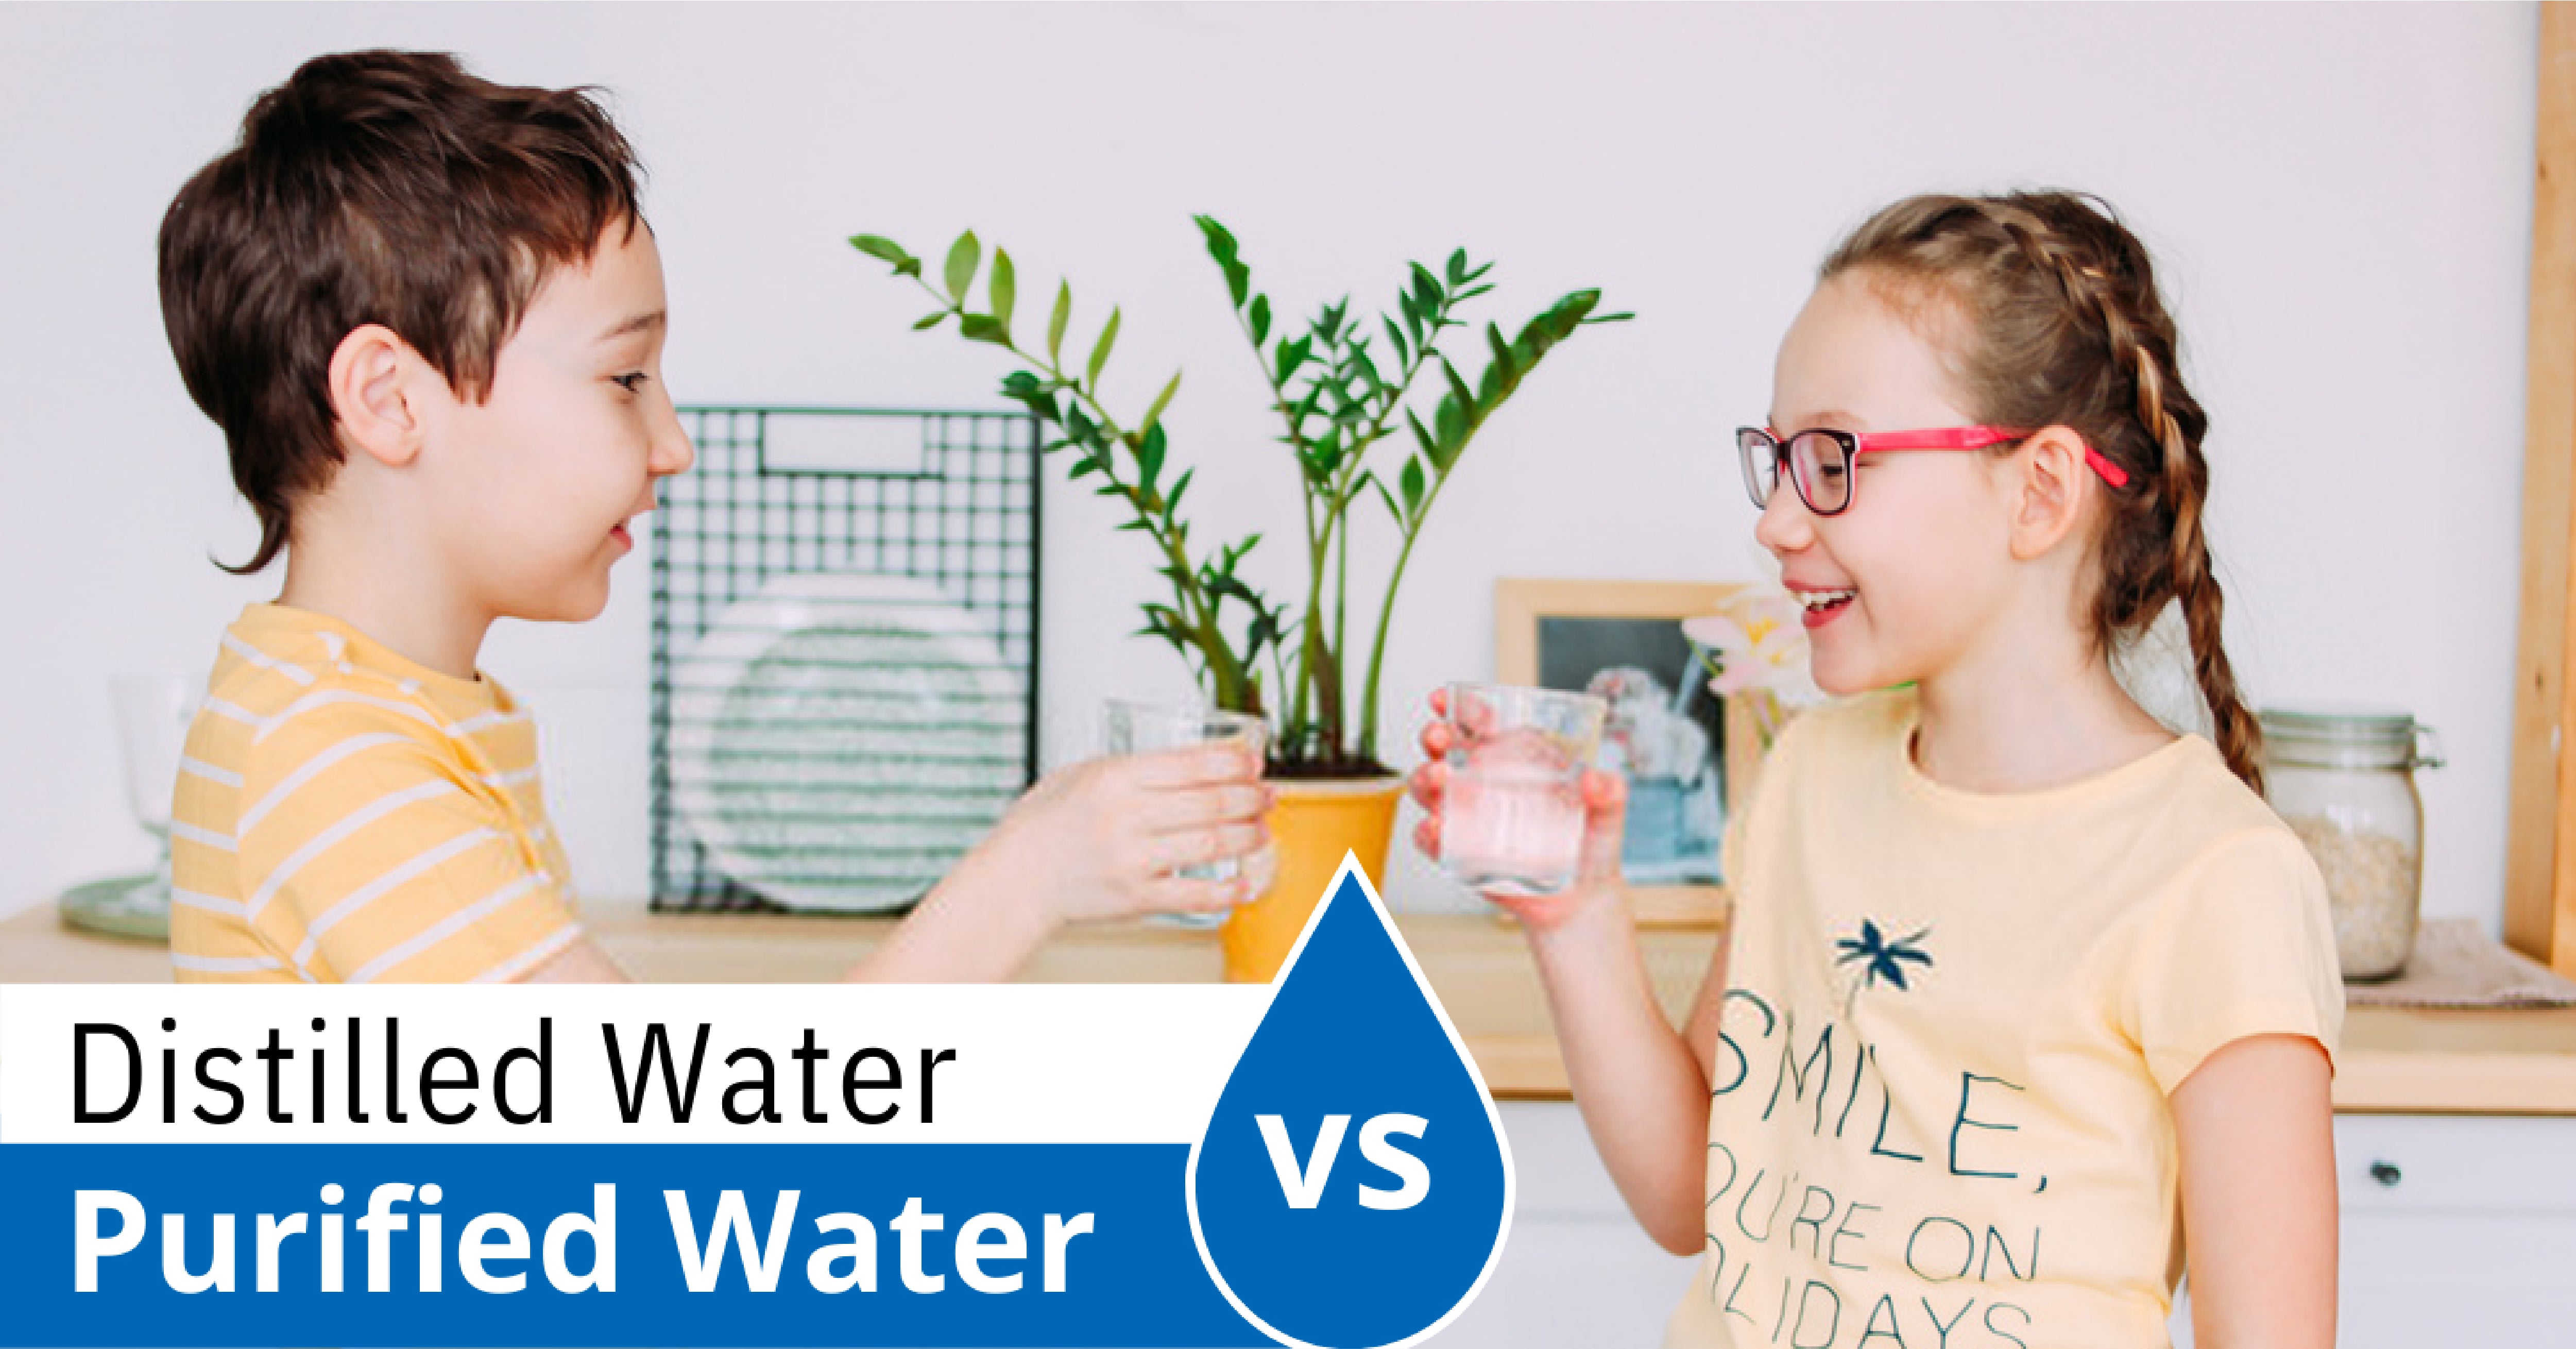 Distilled Water vs. Purified Water: What Are the Differences?